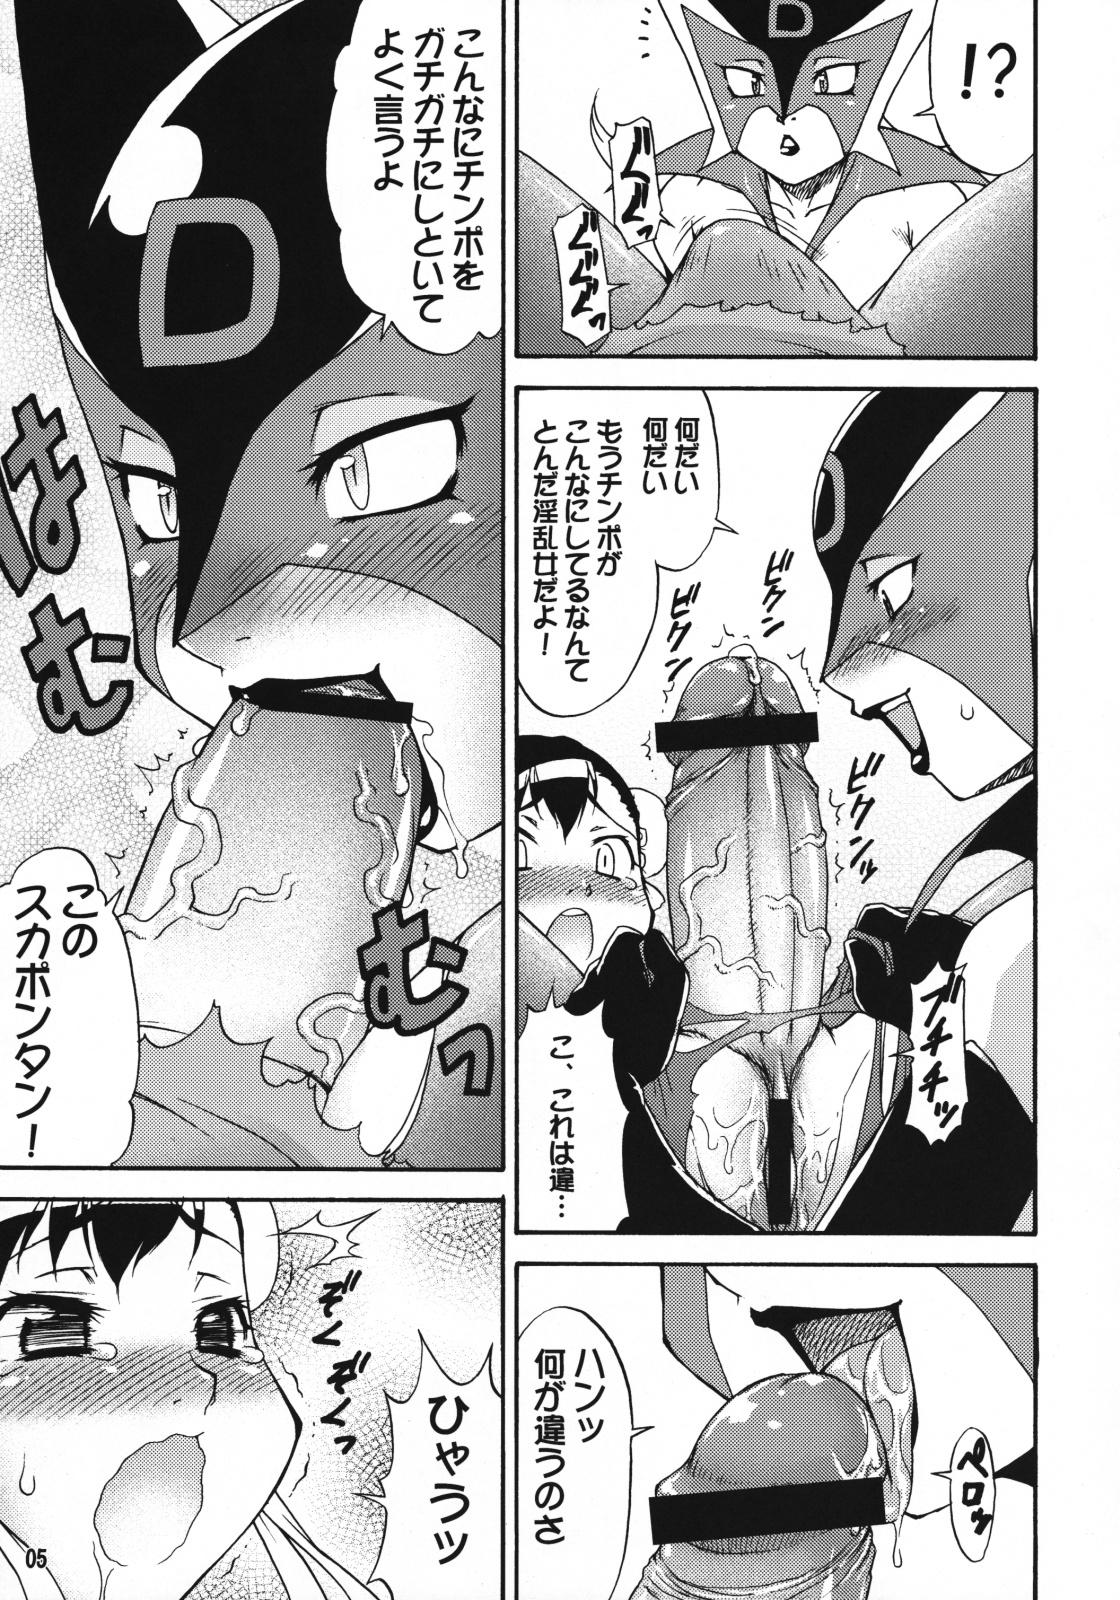 Caseiro Mikawa Ondo 6 - Street fighter Darkstalkers Princess crown Cyberbots Yatterman Young - Page 4